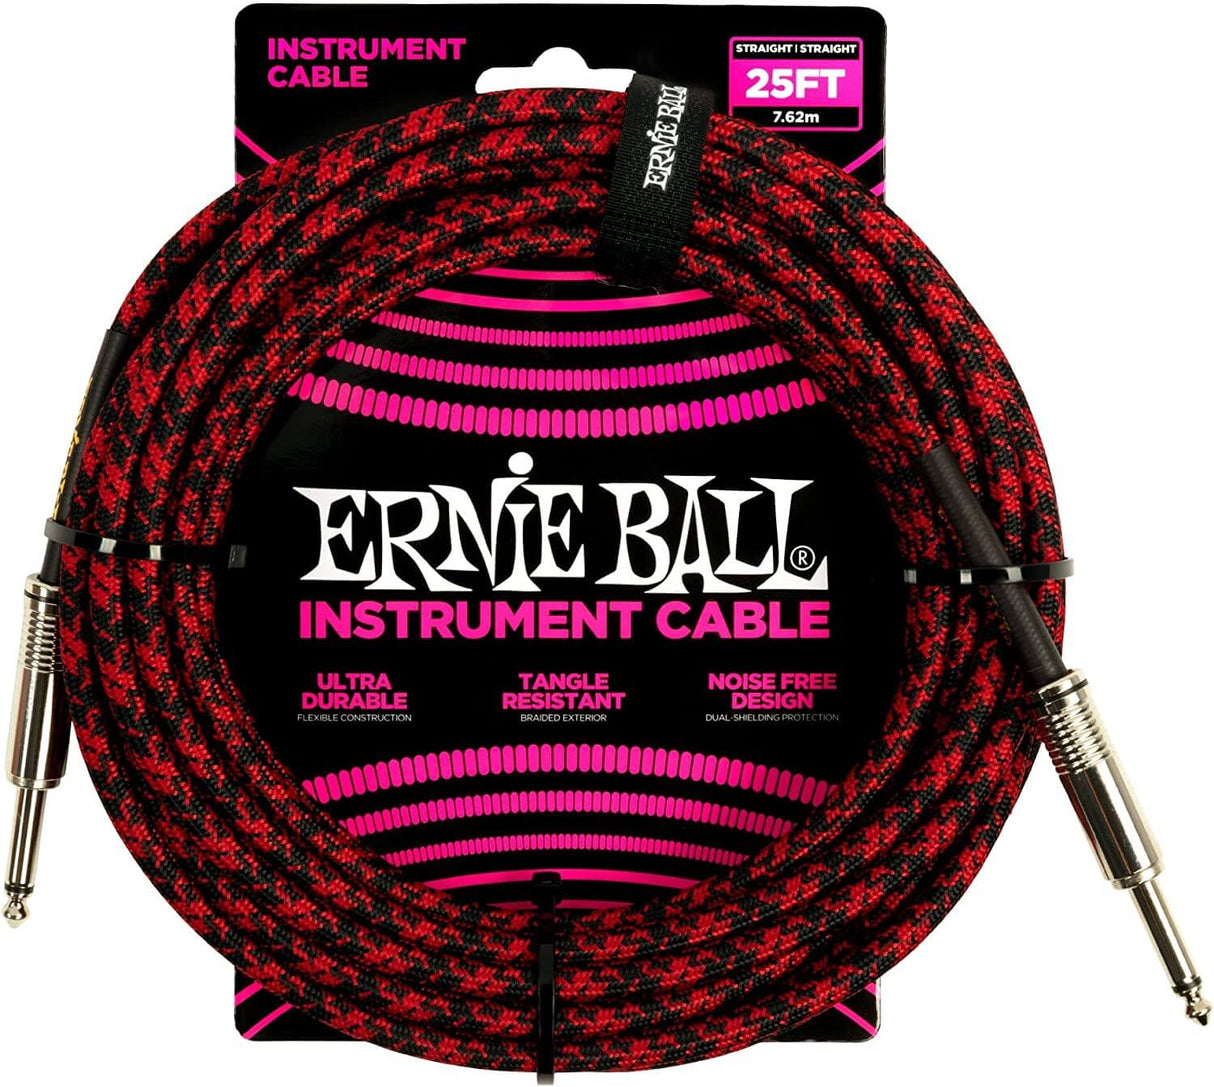 Ernie Ball P06398 Braided Instrument Cable, Straight Straight, 25ft, Red/Black